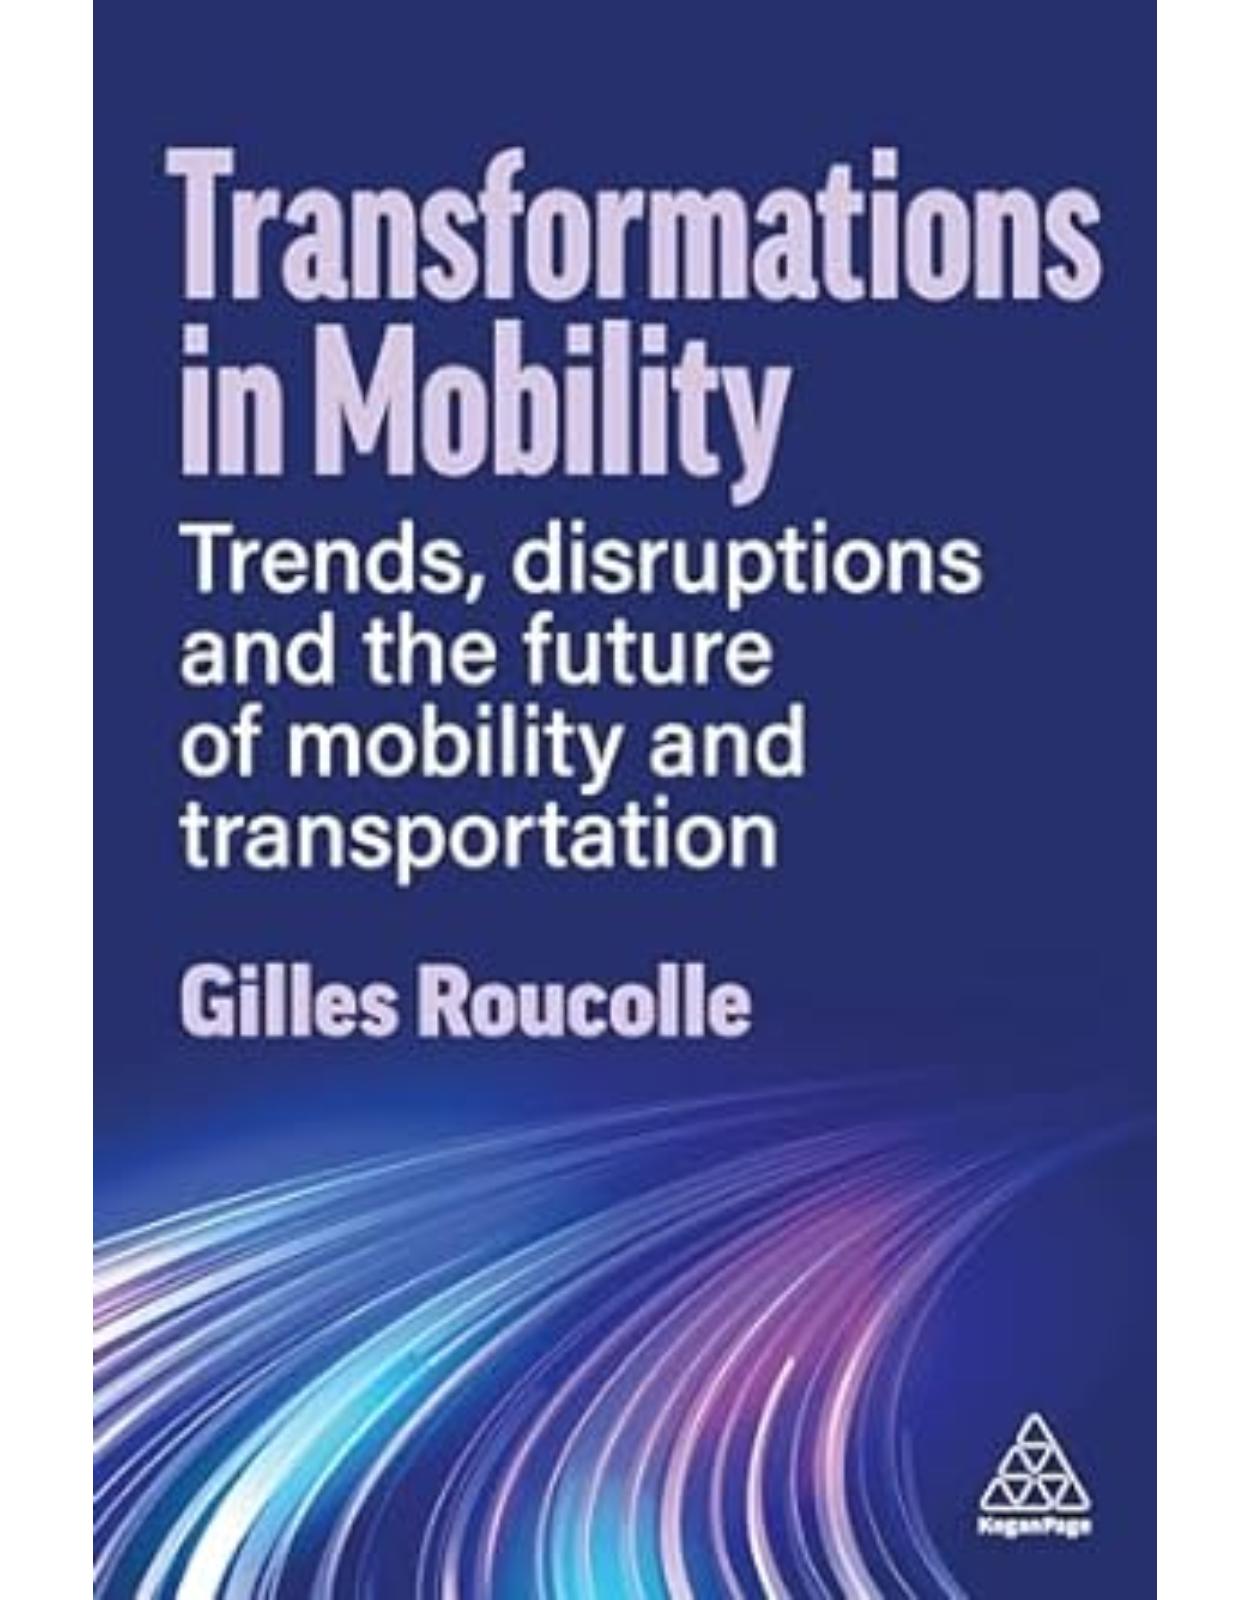 Transformations in Mobility